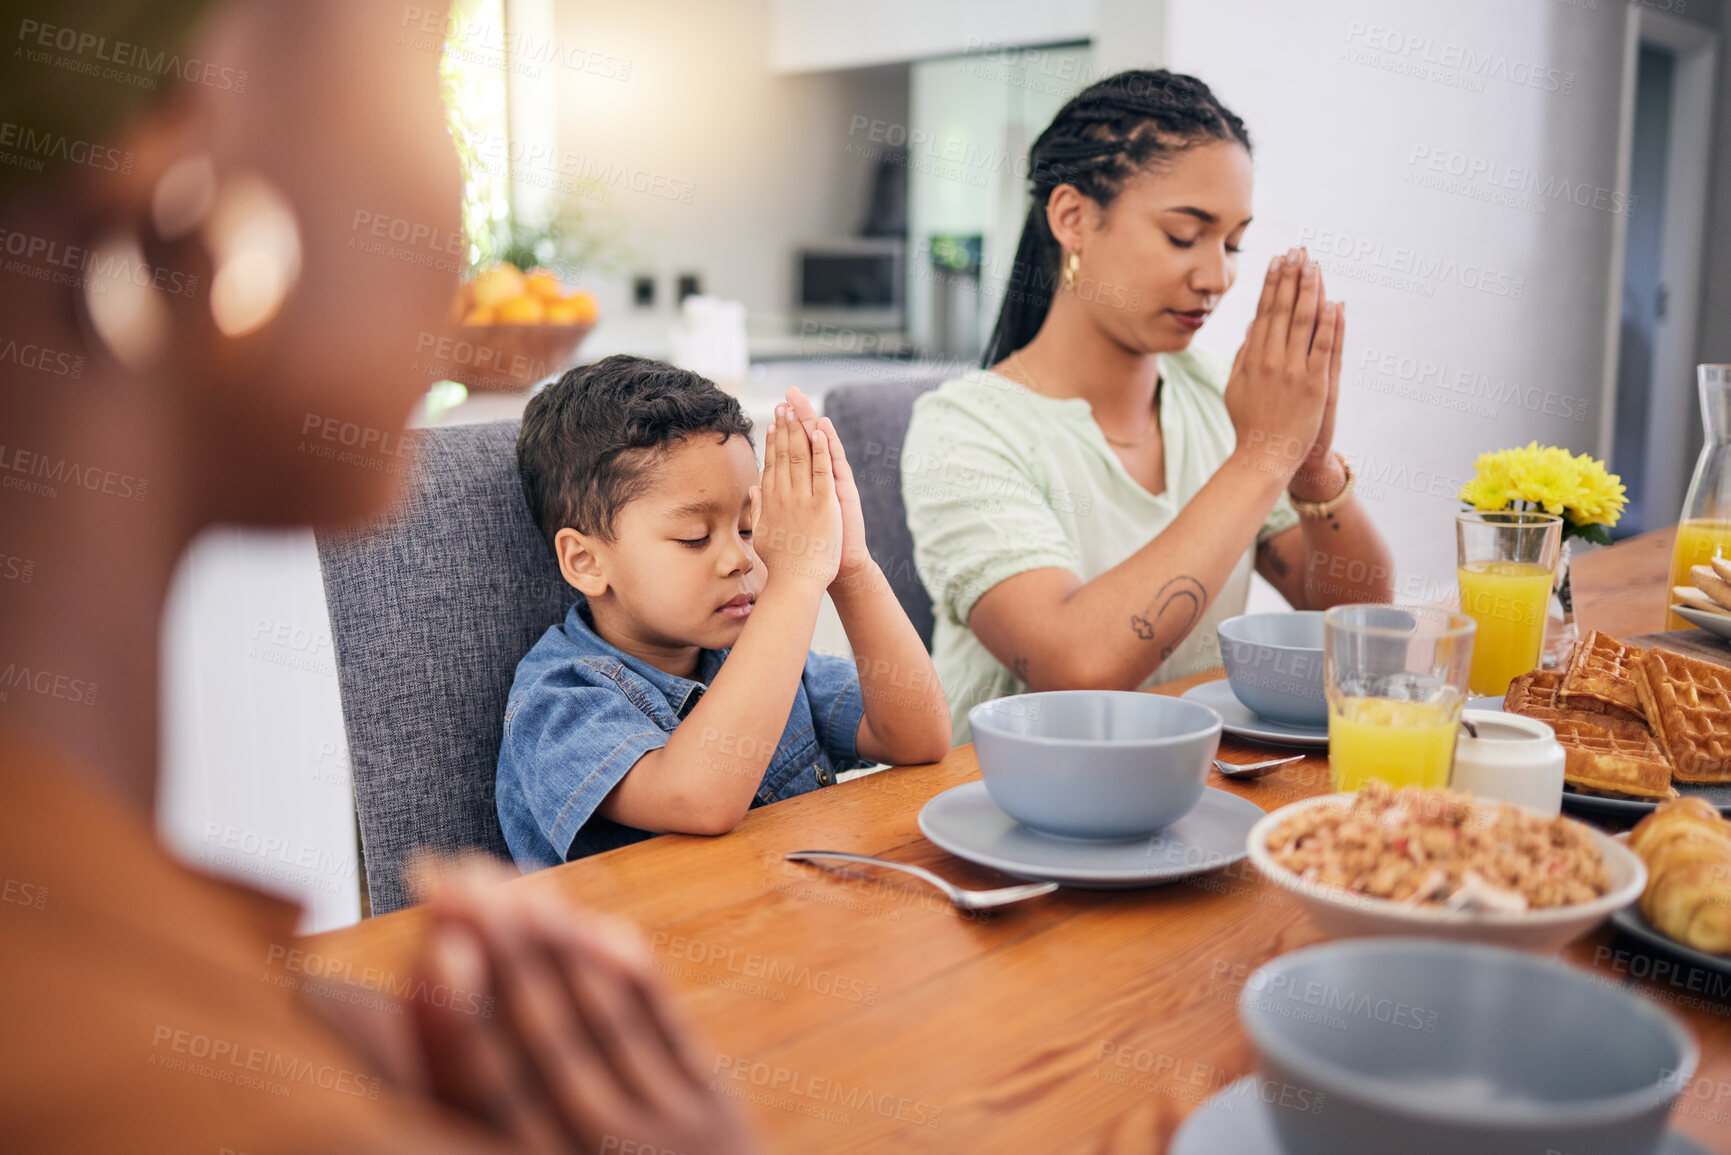 Buy stock photo Praying, breakfast and morning with family at table for food, worship or religion. Prayer, gratitude and grace with parents and child in dining room at home for Christian, spiritual or faith together